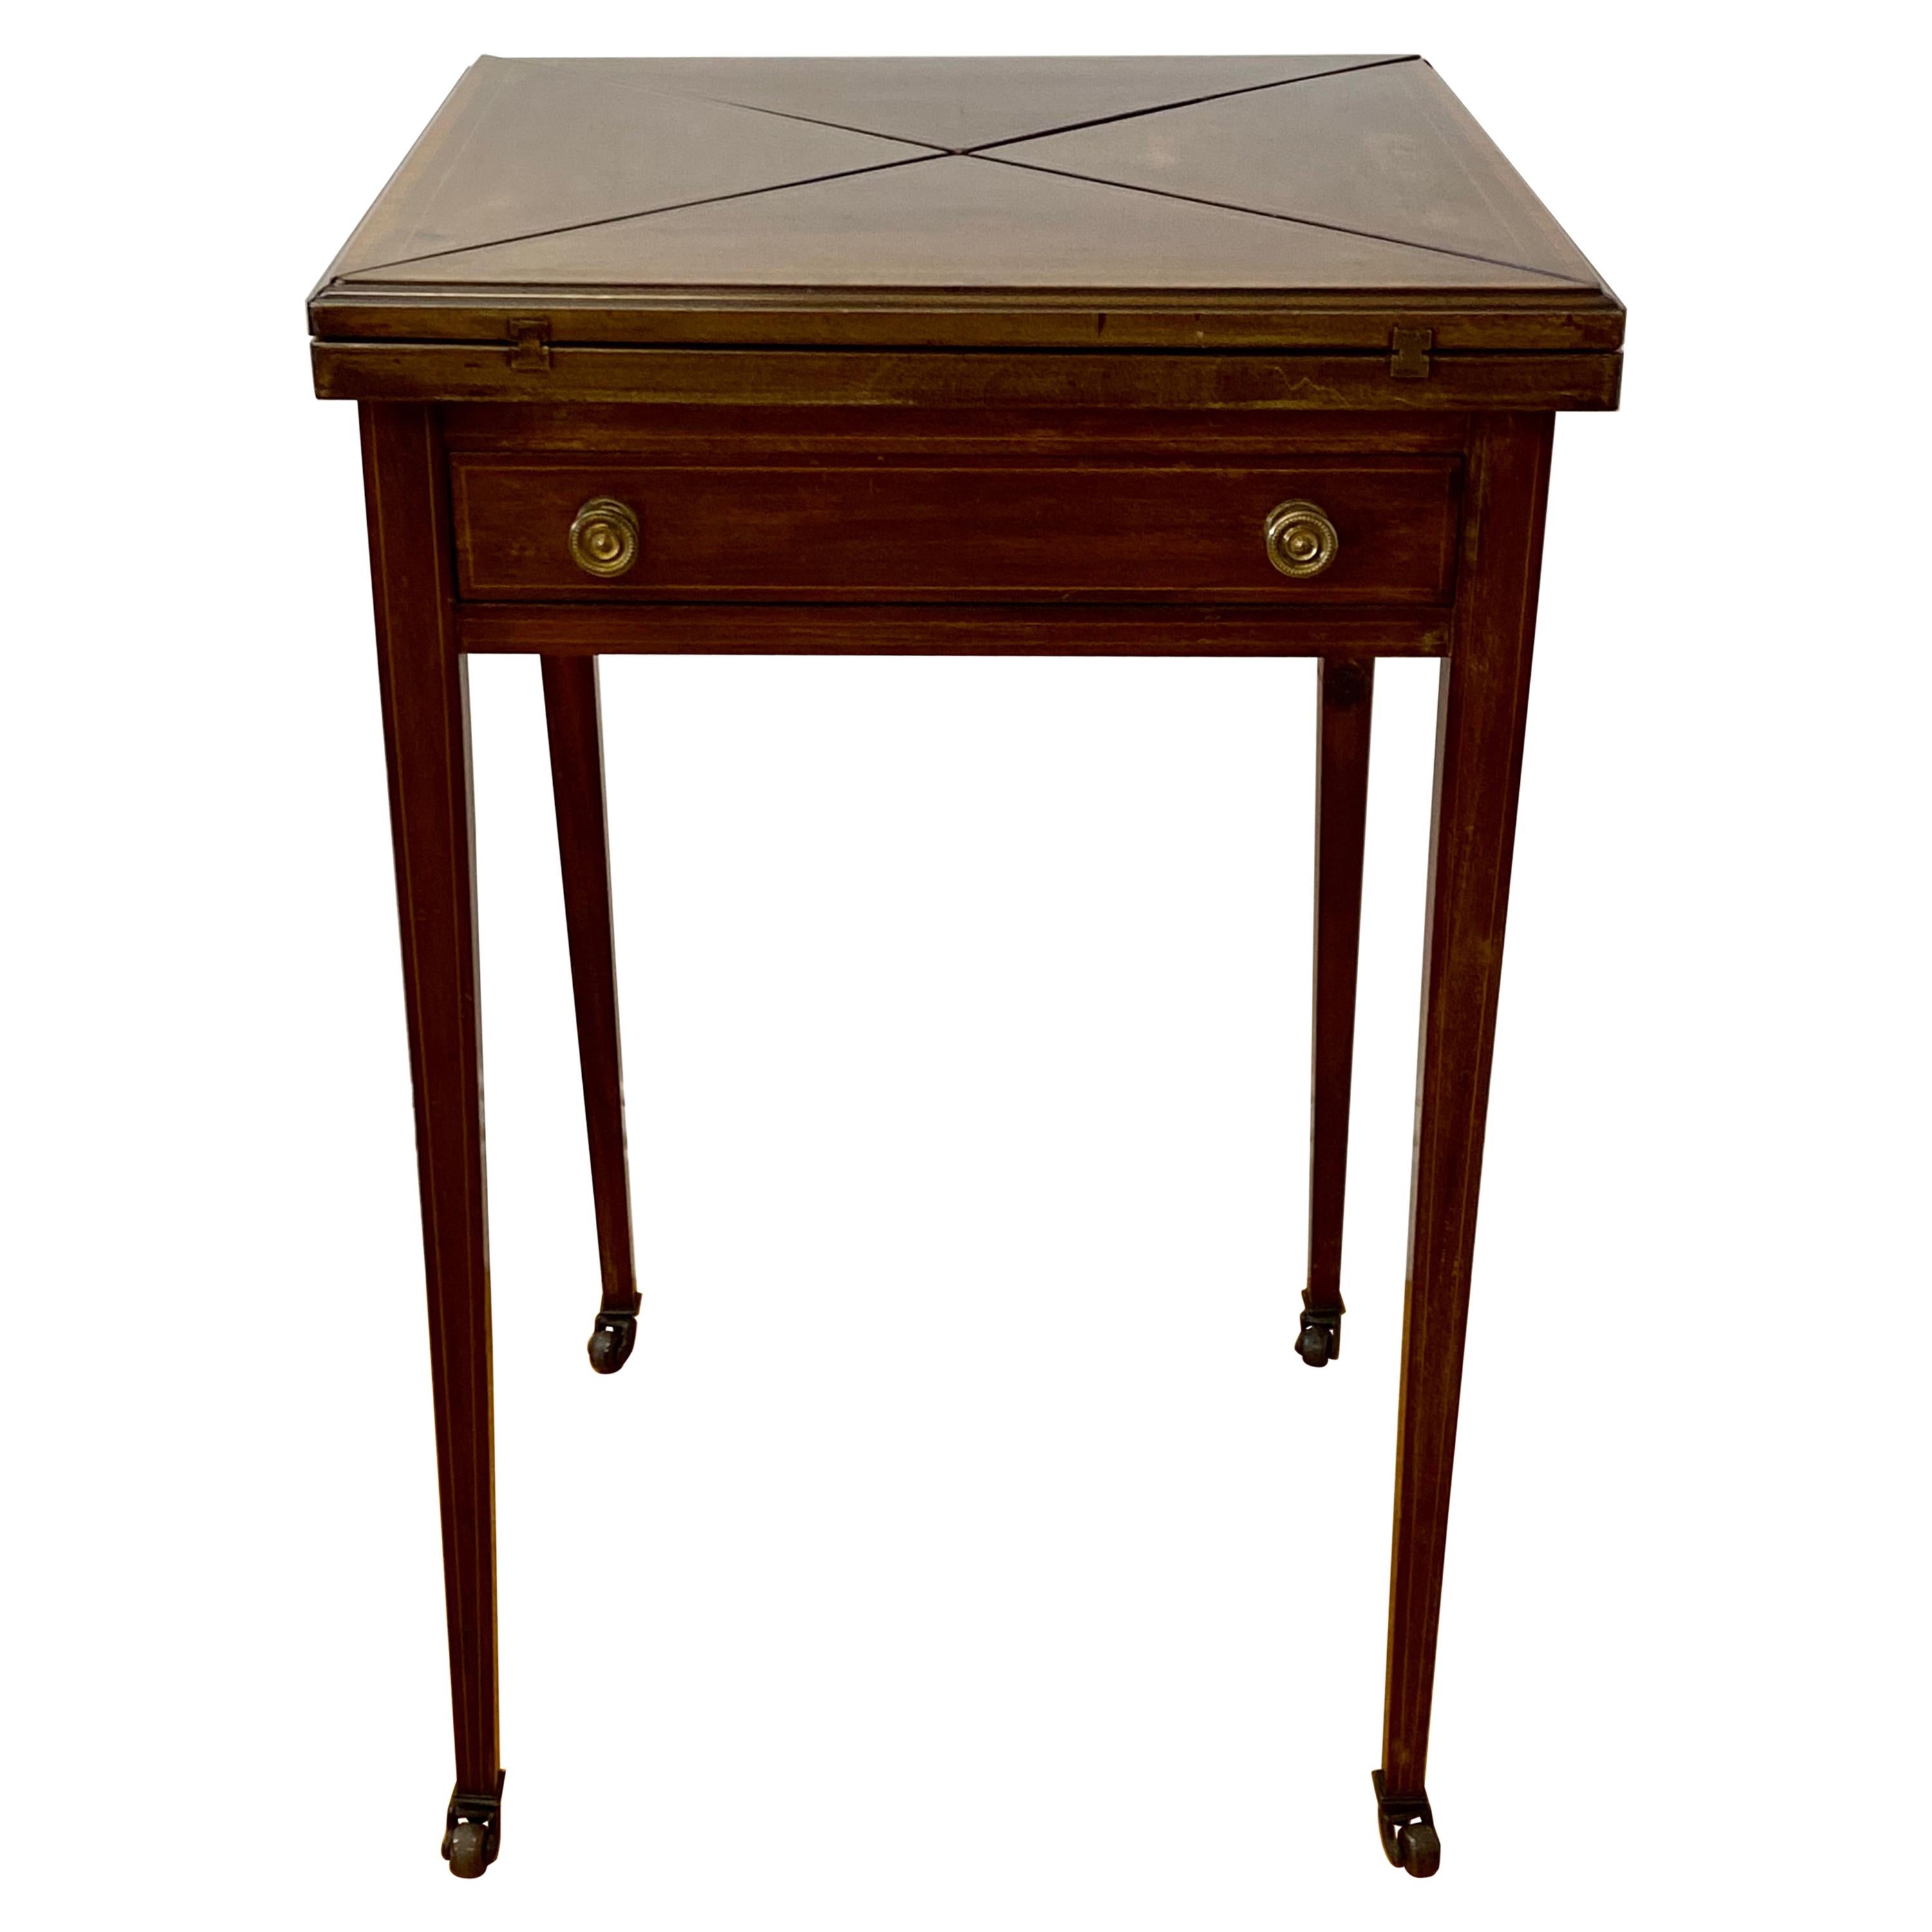 Vintage Inlaid Mahogany Handkerchief Folding Games / Side Table, C.1940 For Sale